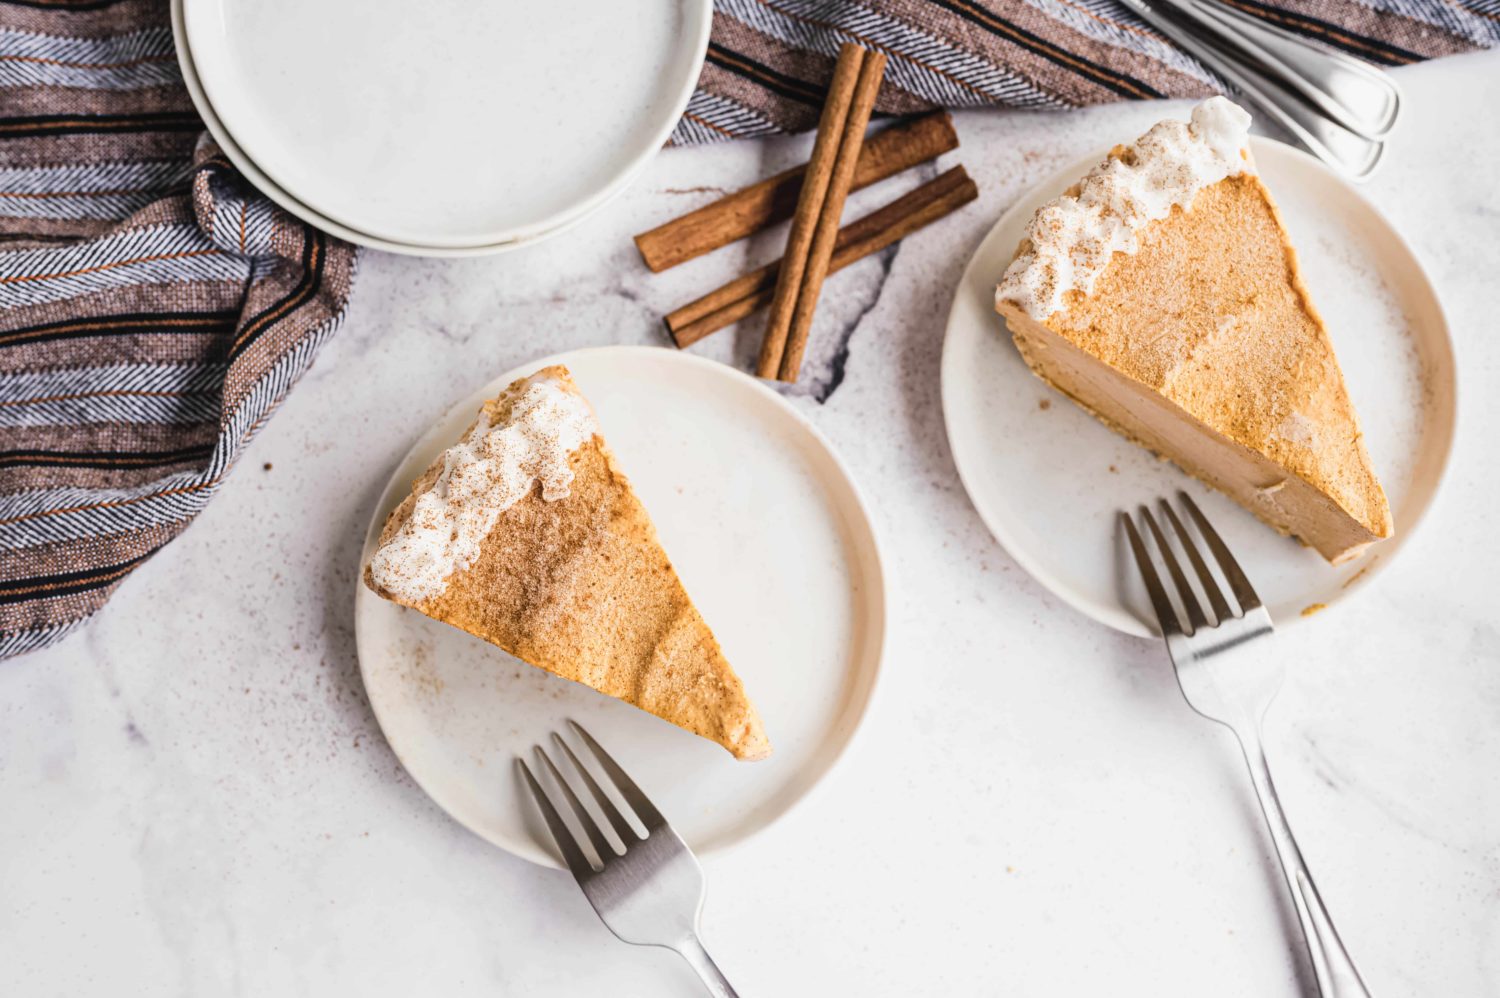 two slices of pumpkin praline cheesecake are pictured with cinnamon sticks and forks ready